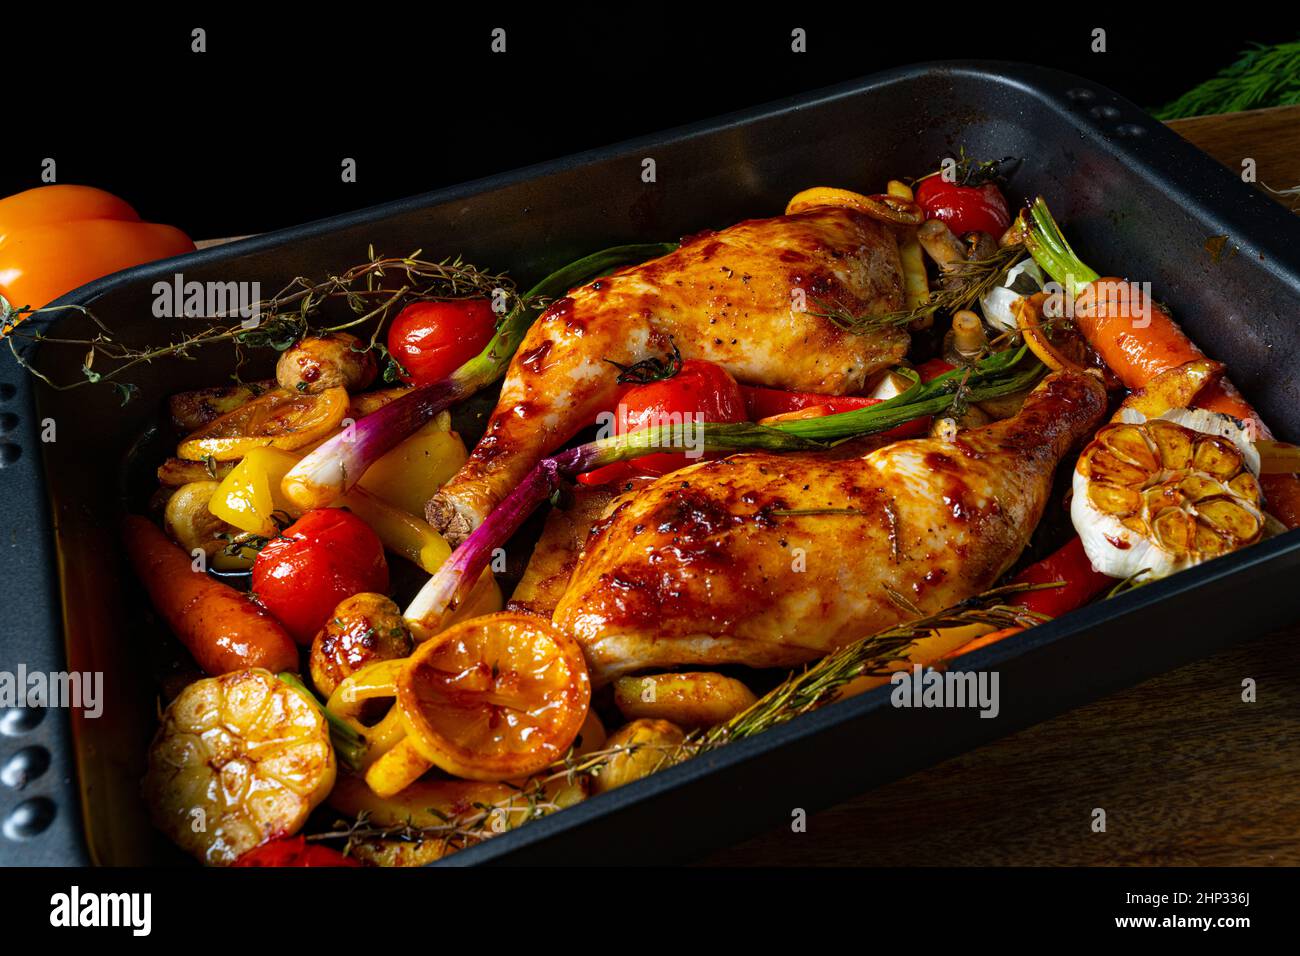 fried chicken legs with various vegetables Stock Photo